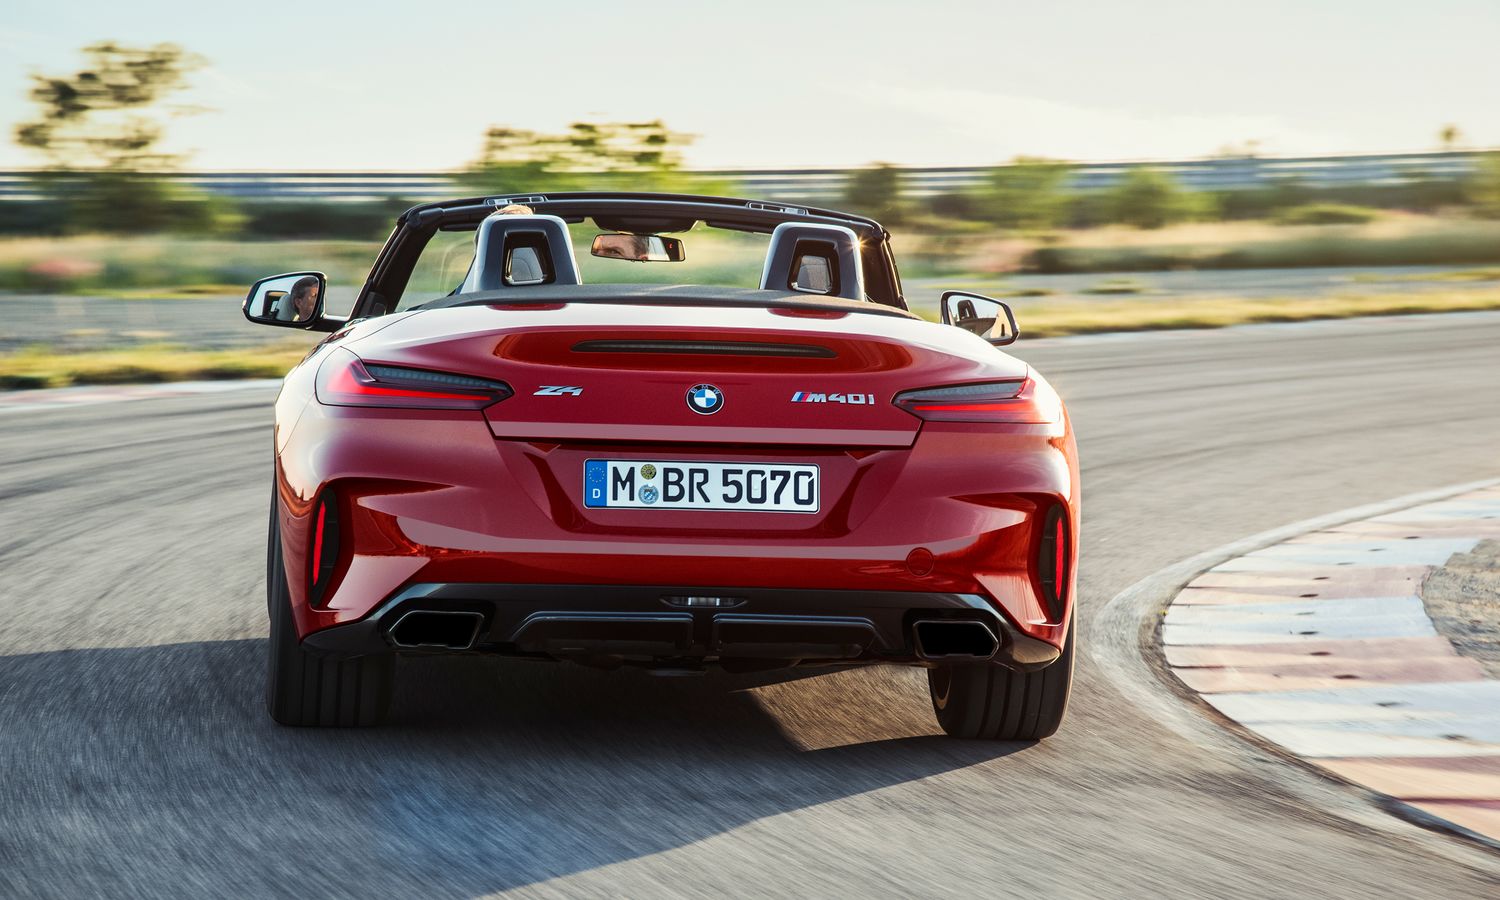 The sporty jaunty Z4 roadster will be the hottest new sports car of 2018.